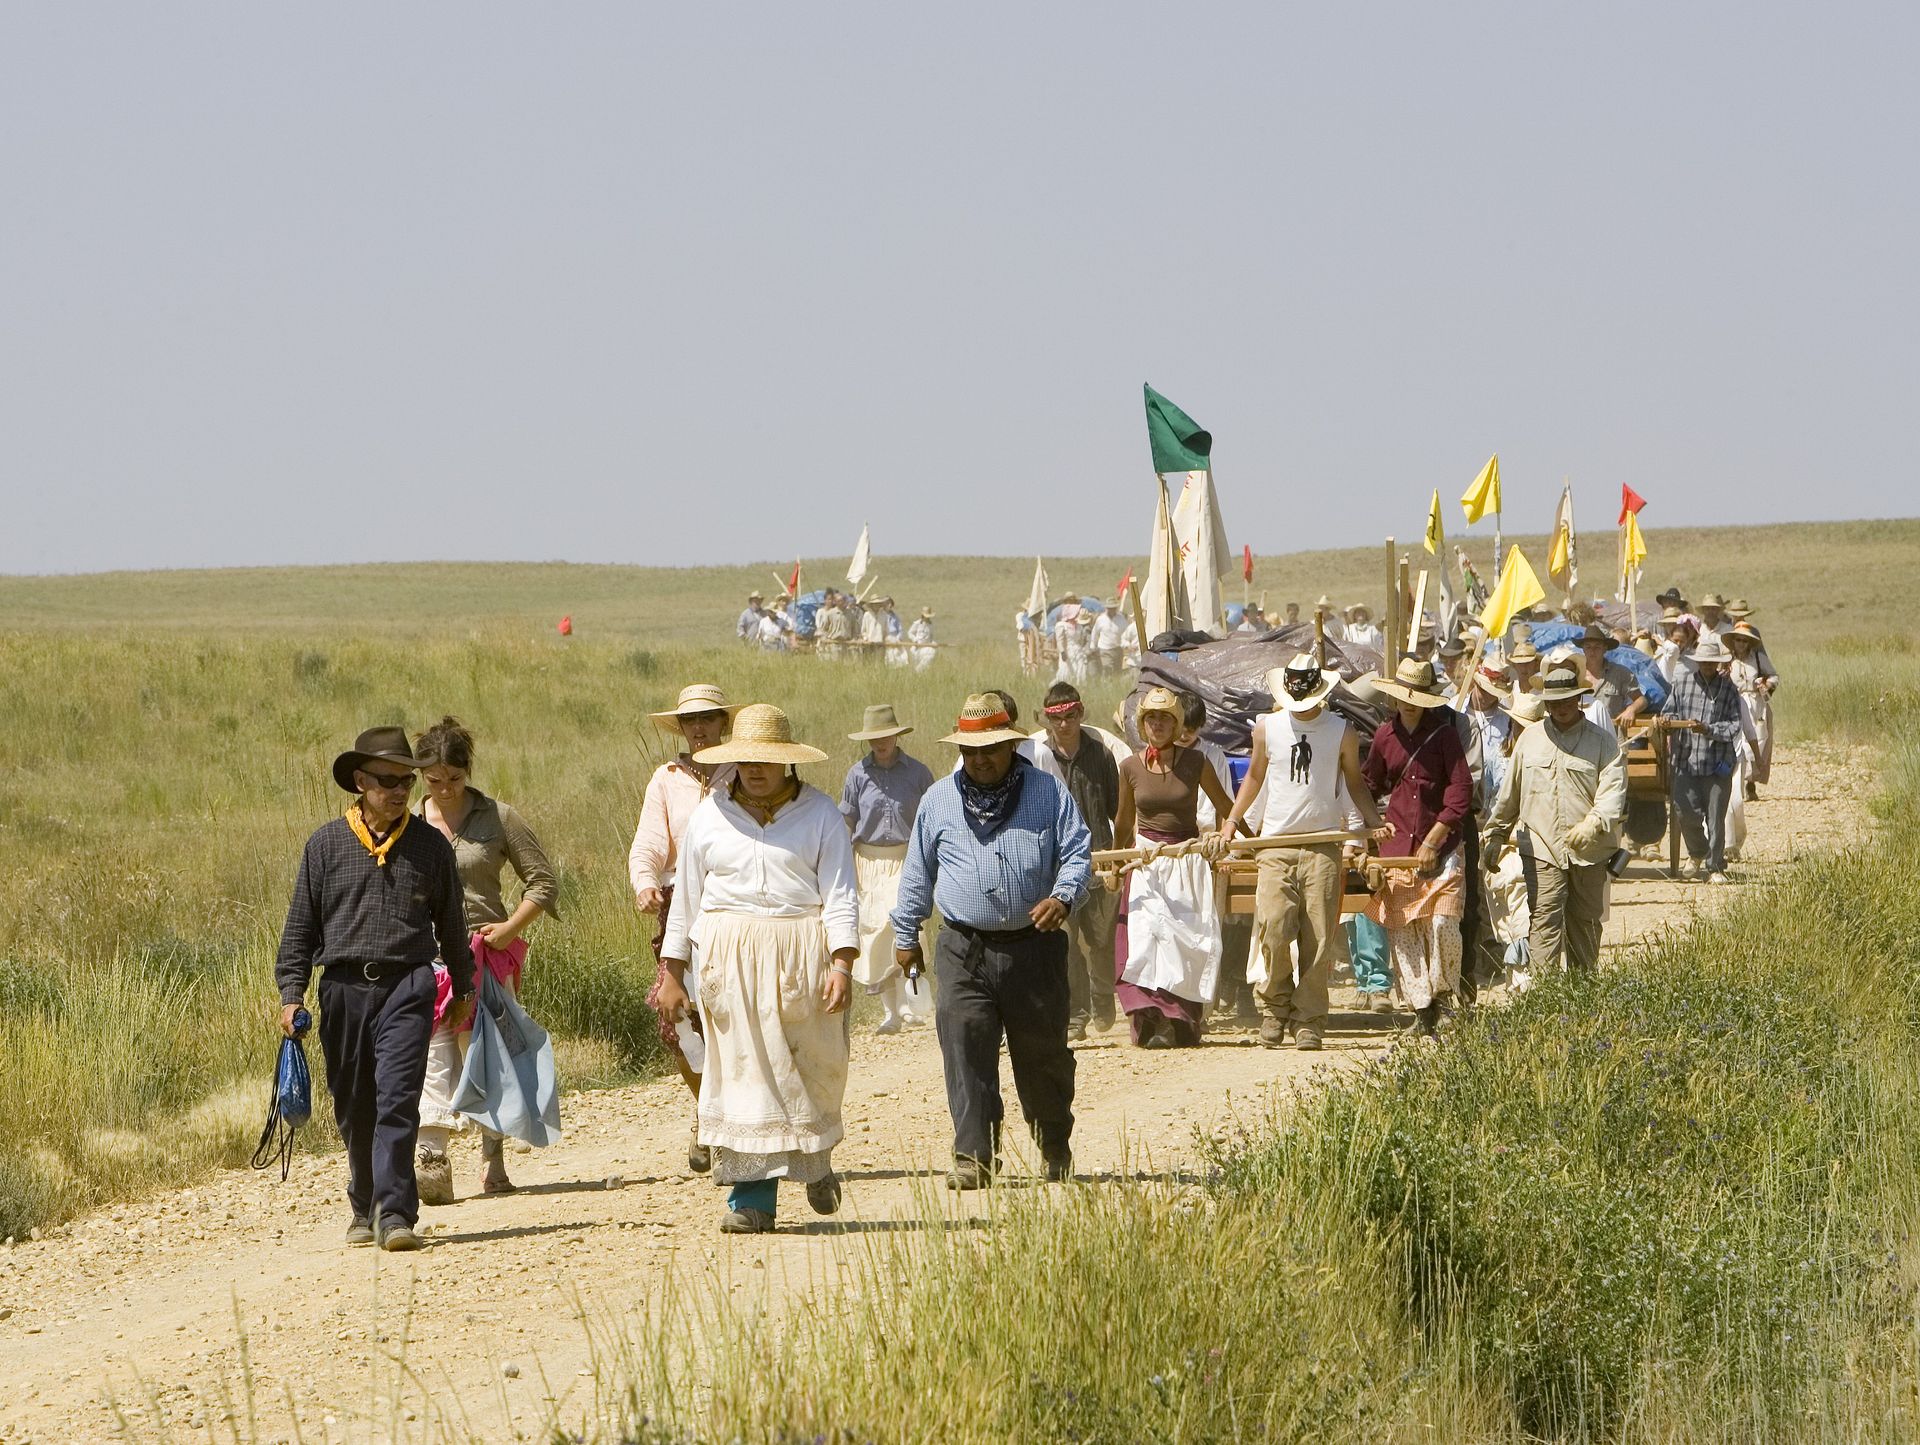 A group of men and women push handcarts down a hill amid grassy plains.